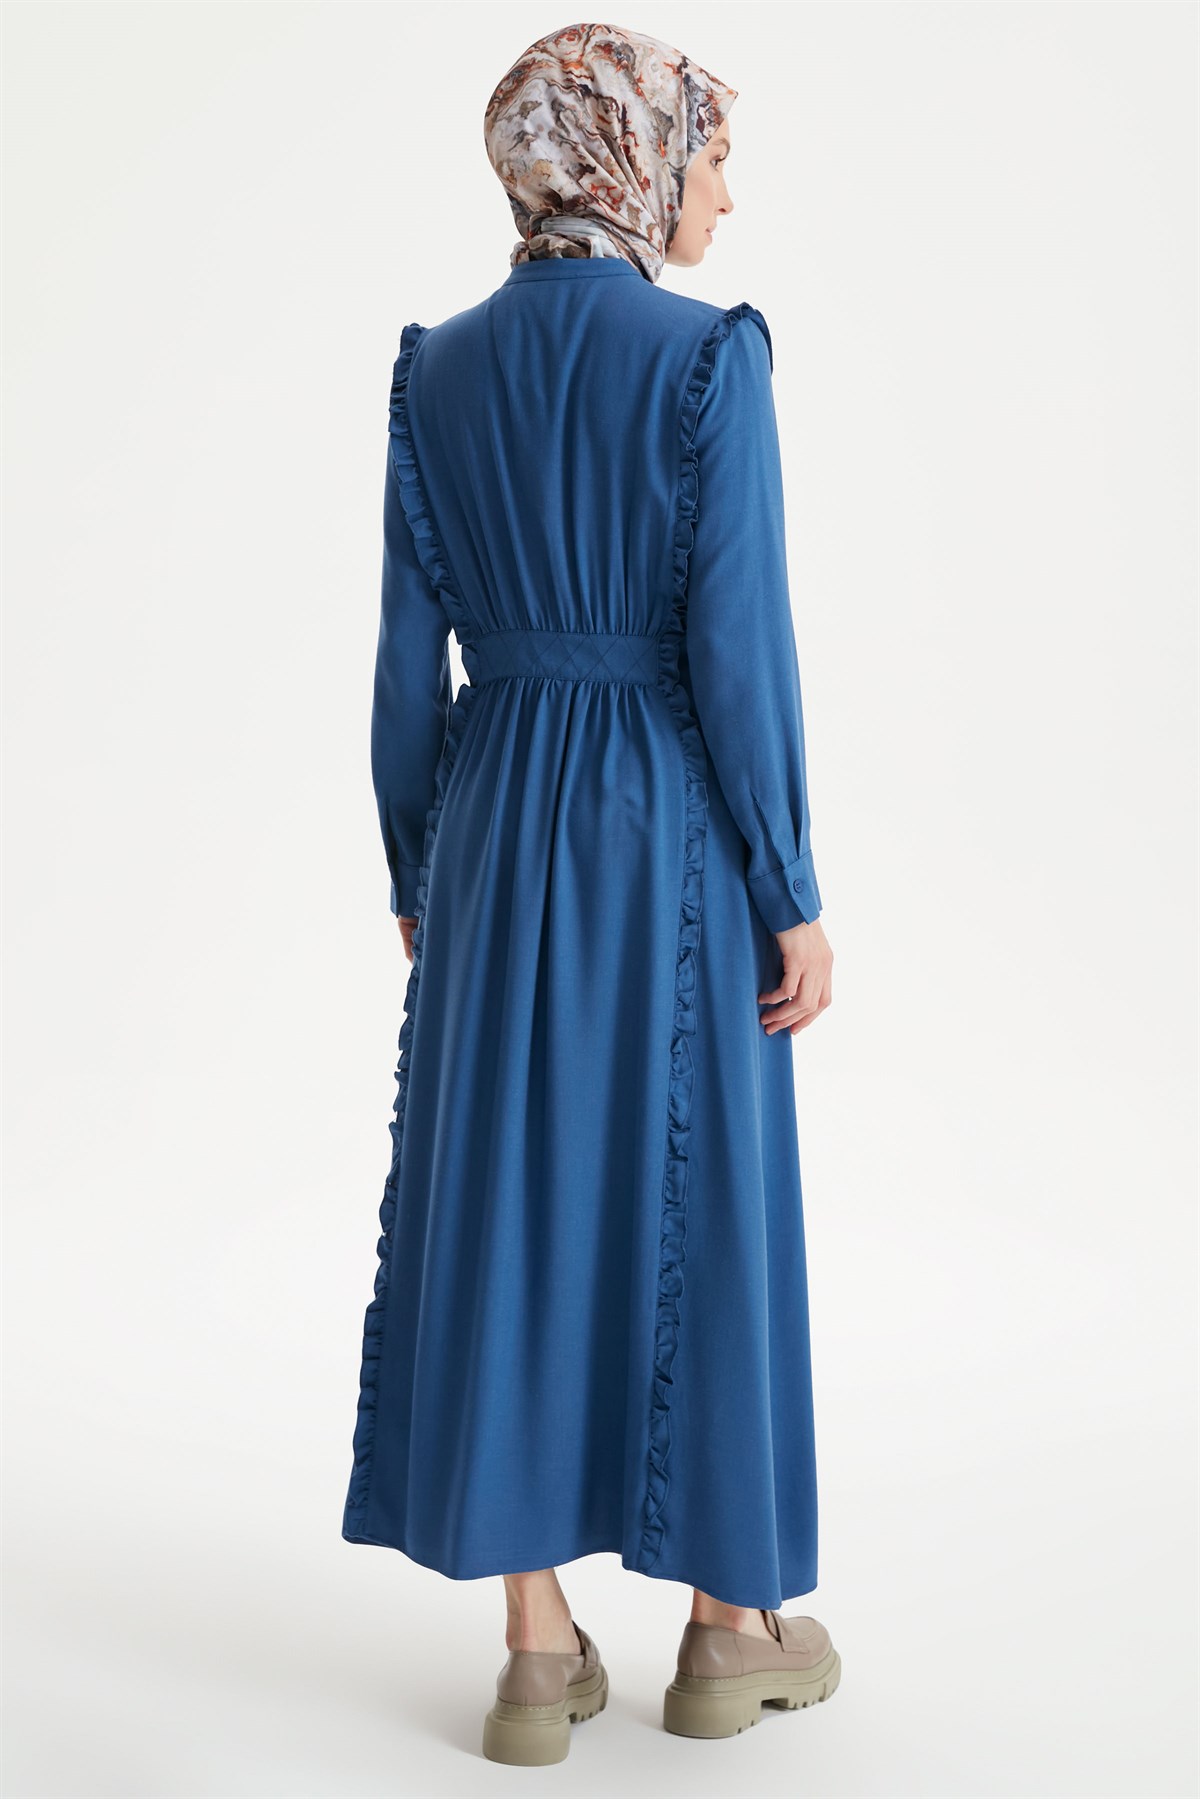 Ruffle Detailed Robed Dress - Navy Blue